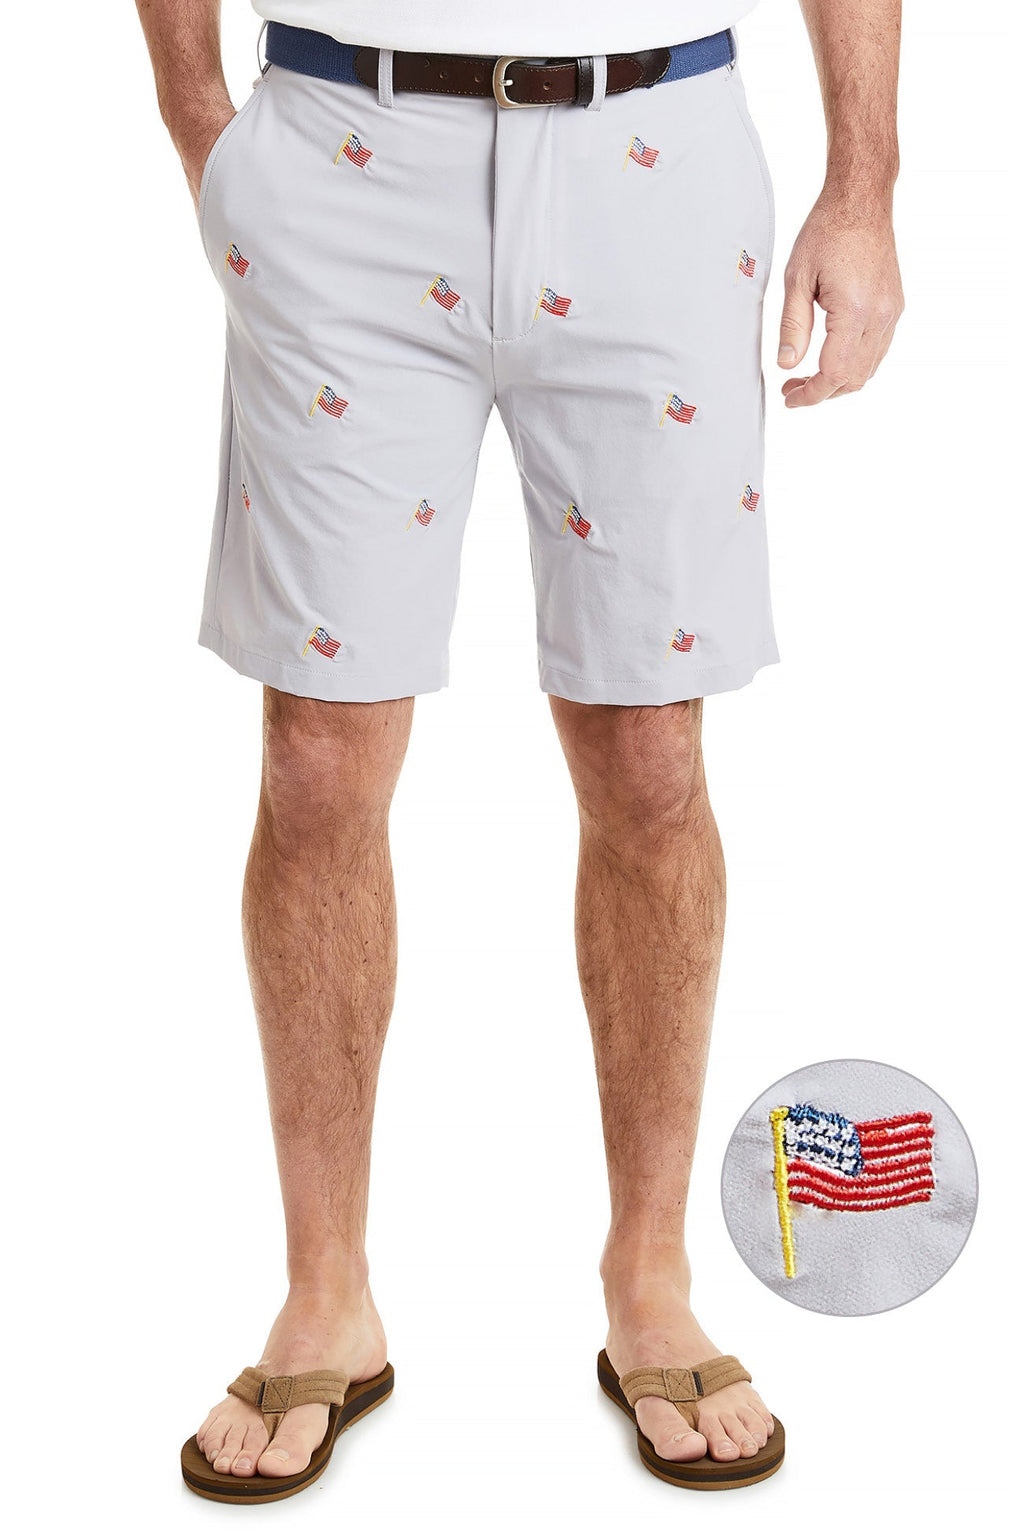 ACKformance Short Cement with USA Flag MENS EMBROIDERED SHORTS Castaway ...